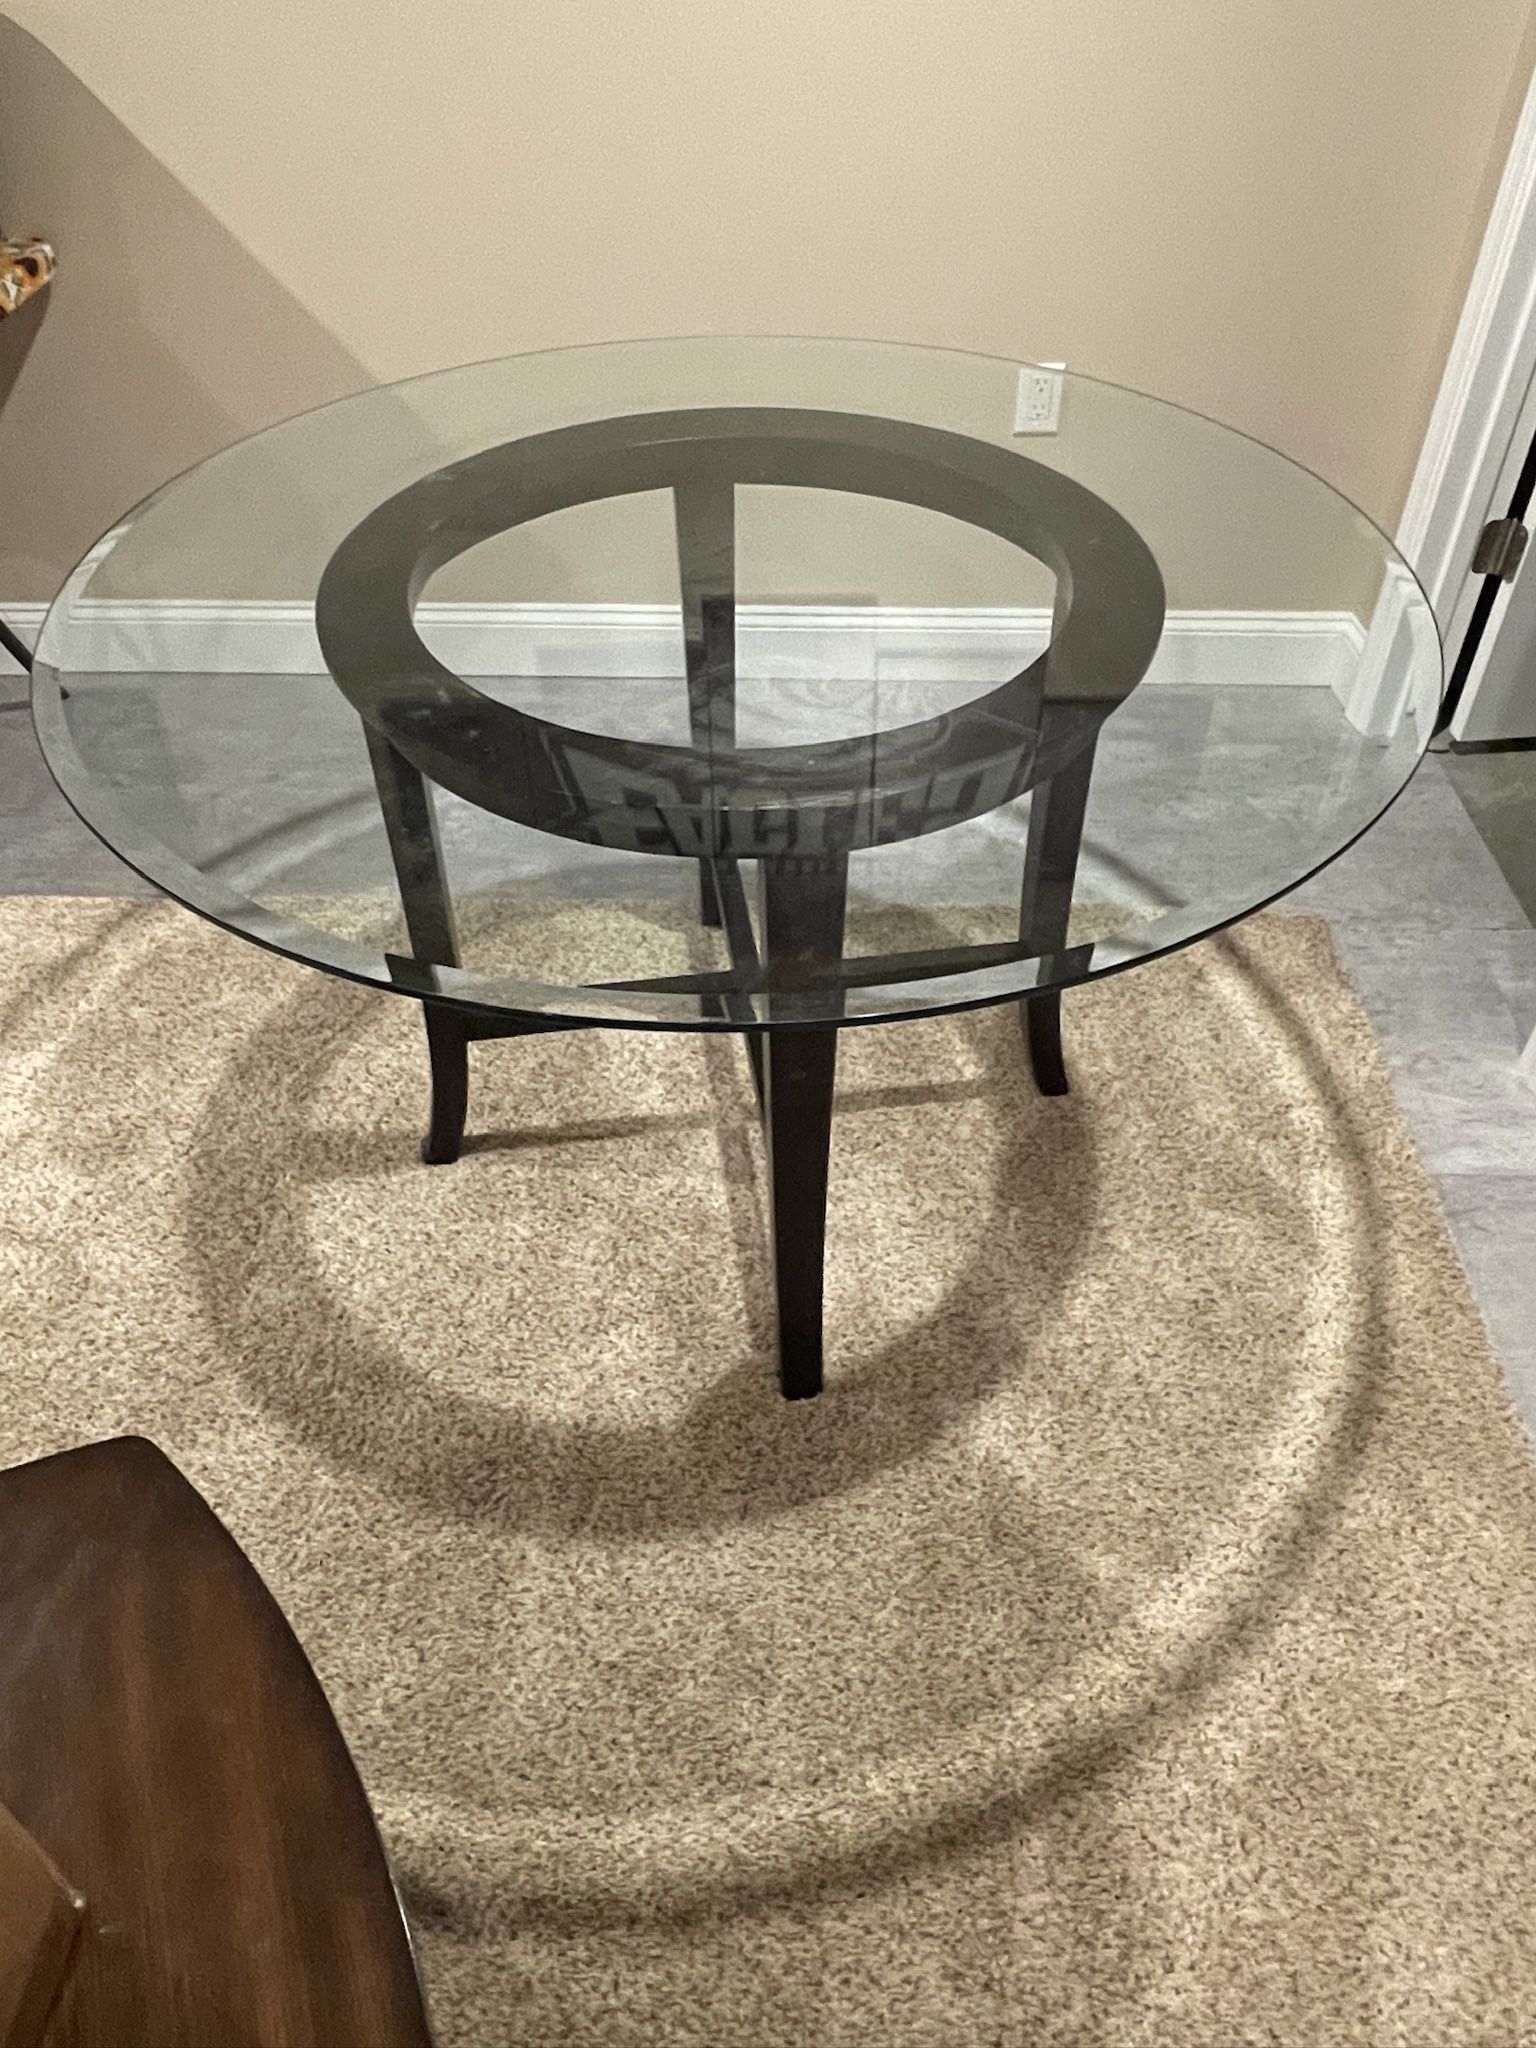 48” Dining Room Glass Table w/Base